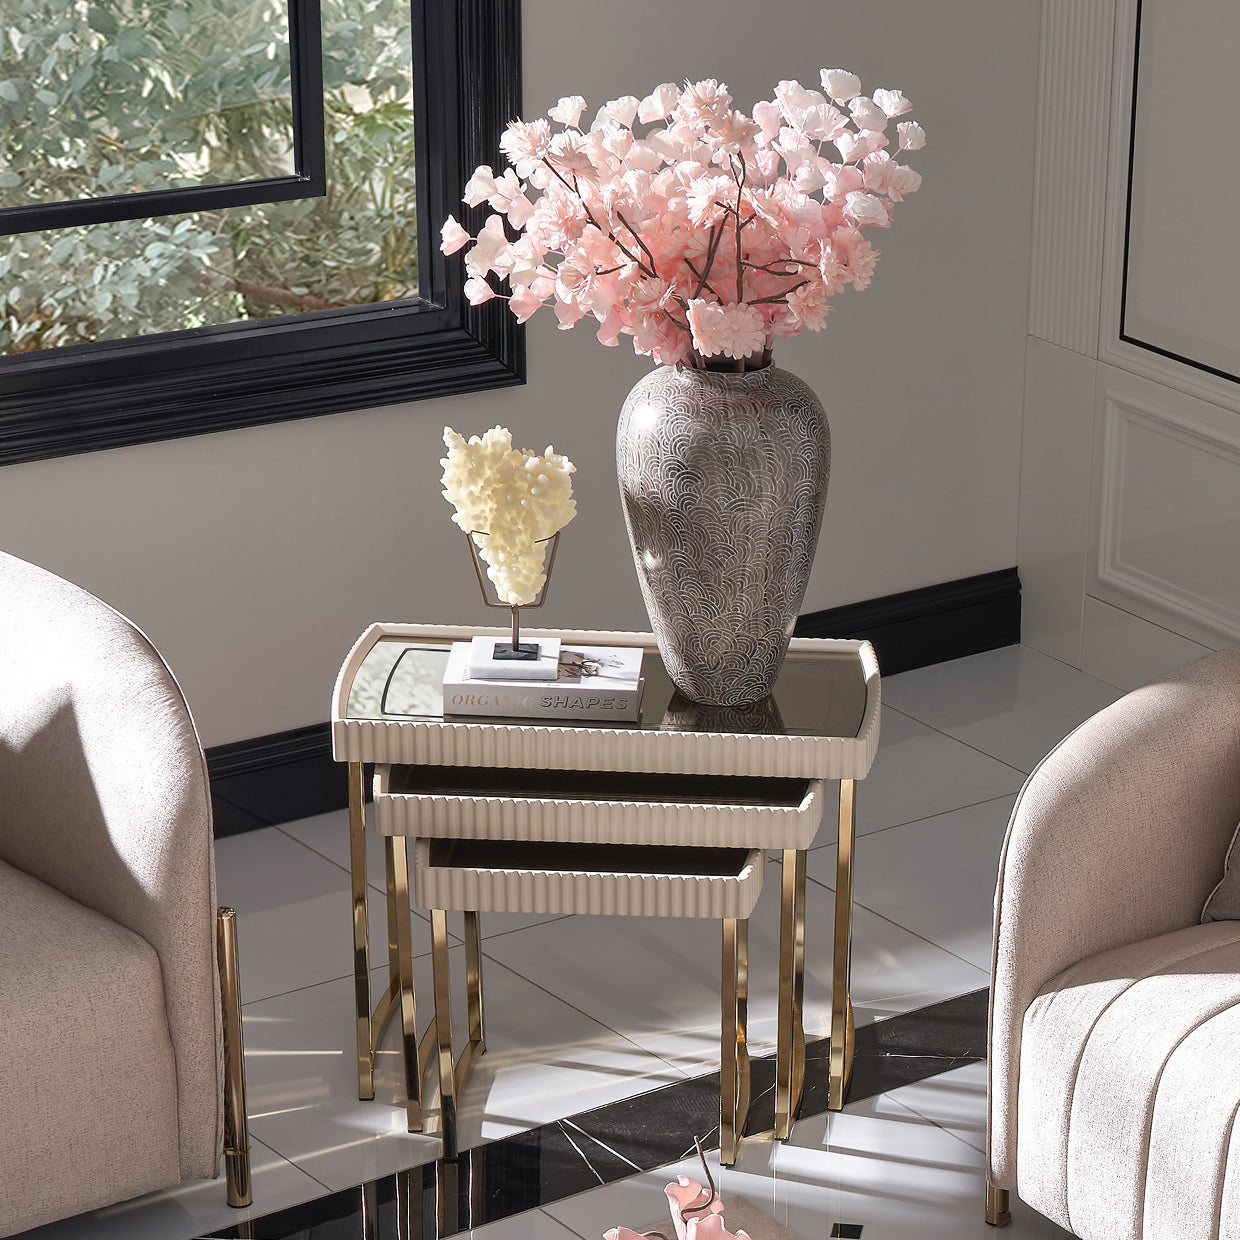 Nesting Tables, Silken Matte Cream, Home décor, Lisbon Nesting Tables, Versatile, Stylish, Living space, Elegant tables, Silky matte tops, Reeded trims, Space-saving, Gold legs, Refinement, Mirrored inlays, Visual appeal, Luxurious charm, dream art , Michael amini 